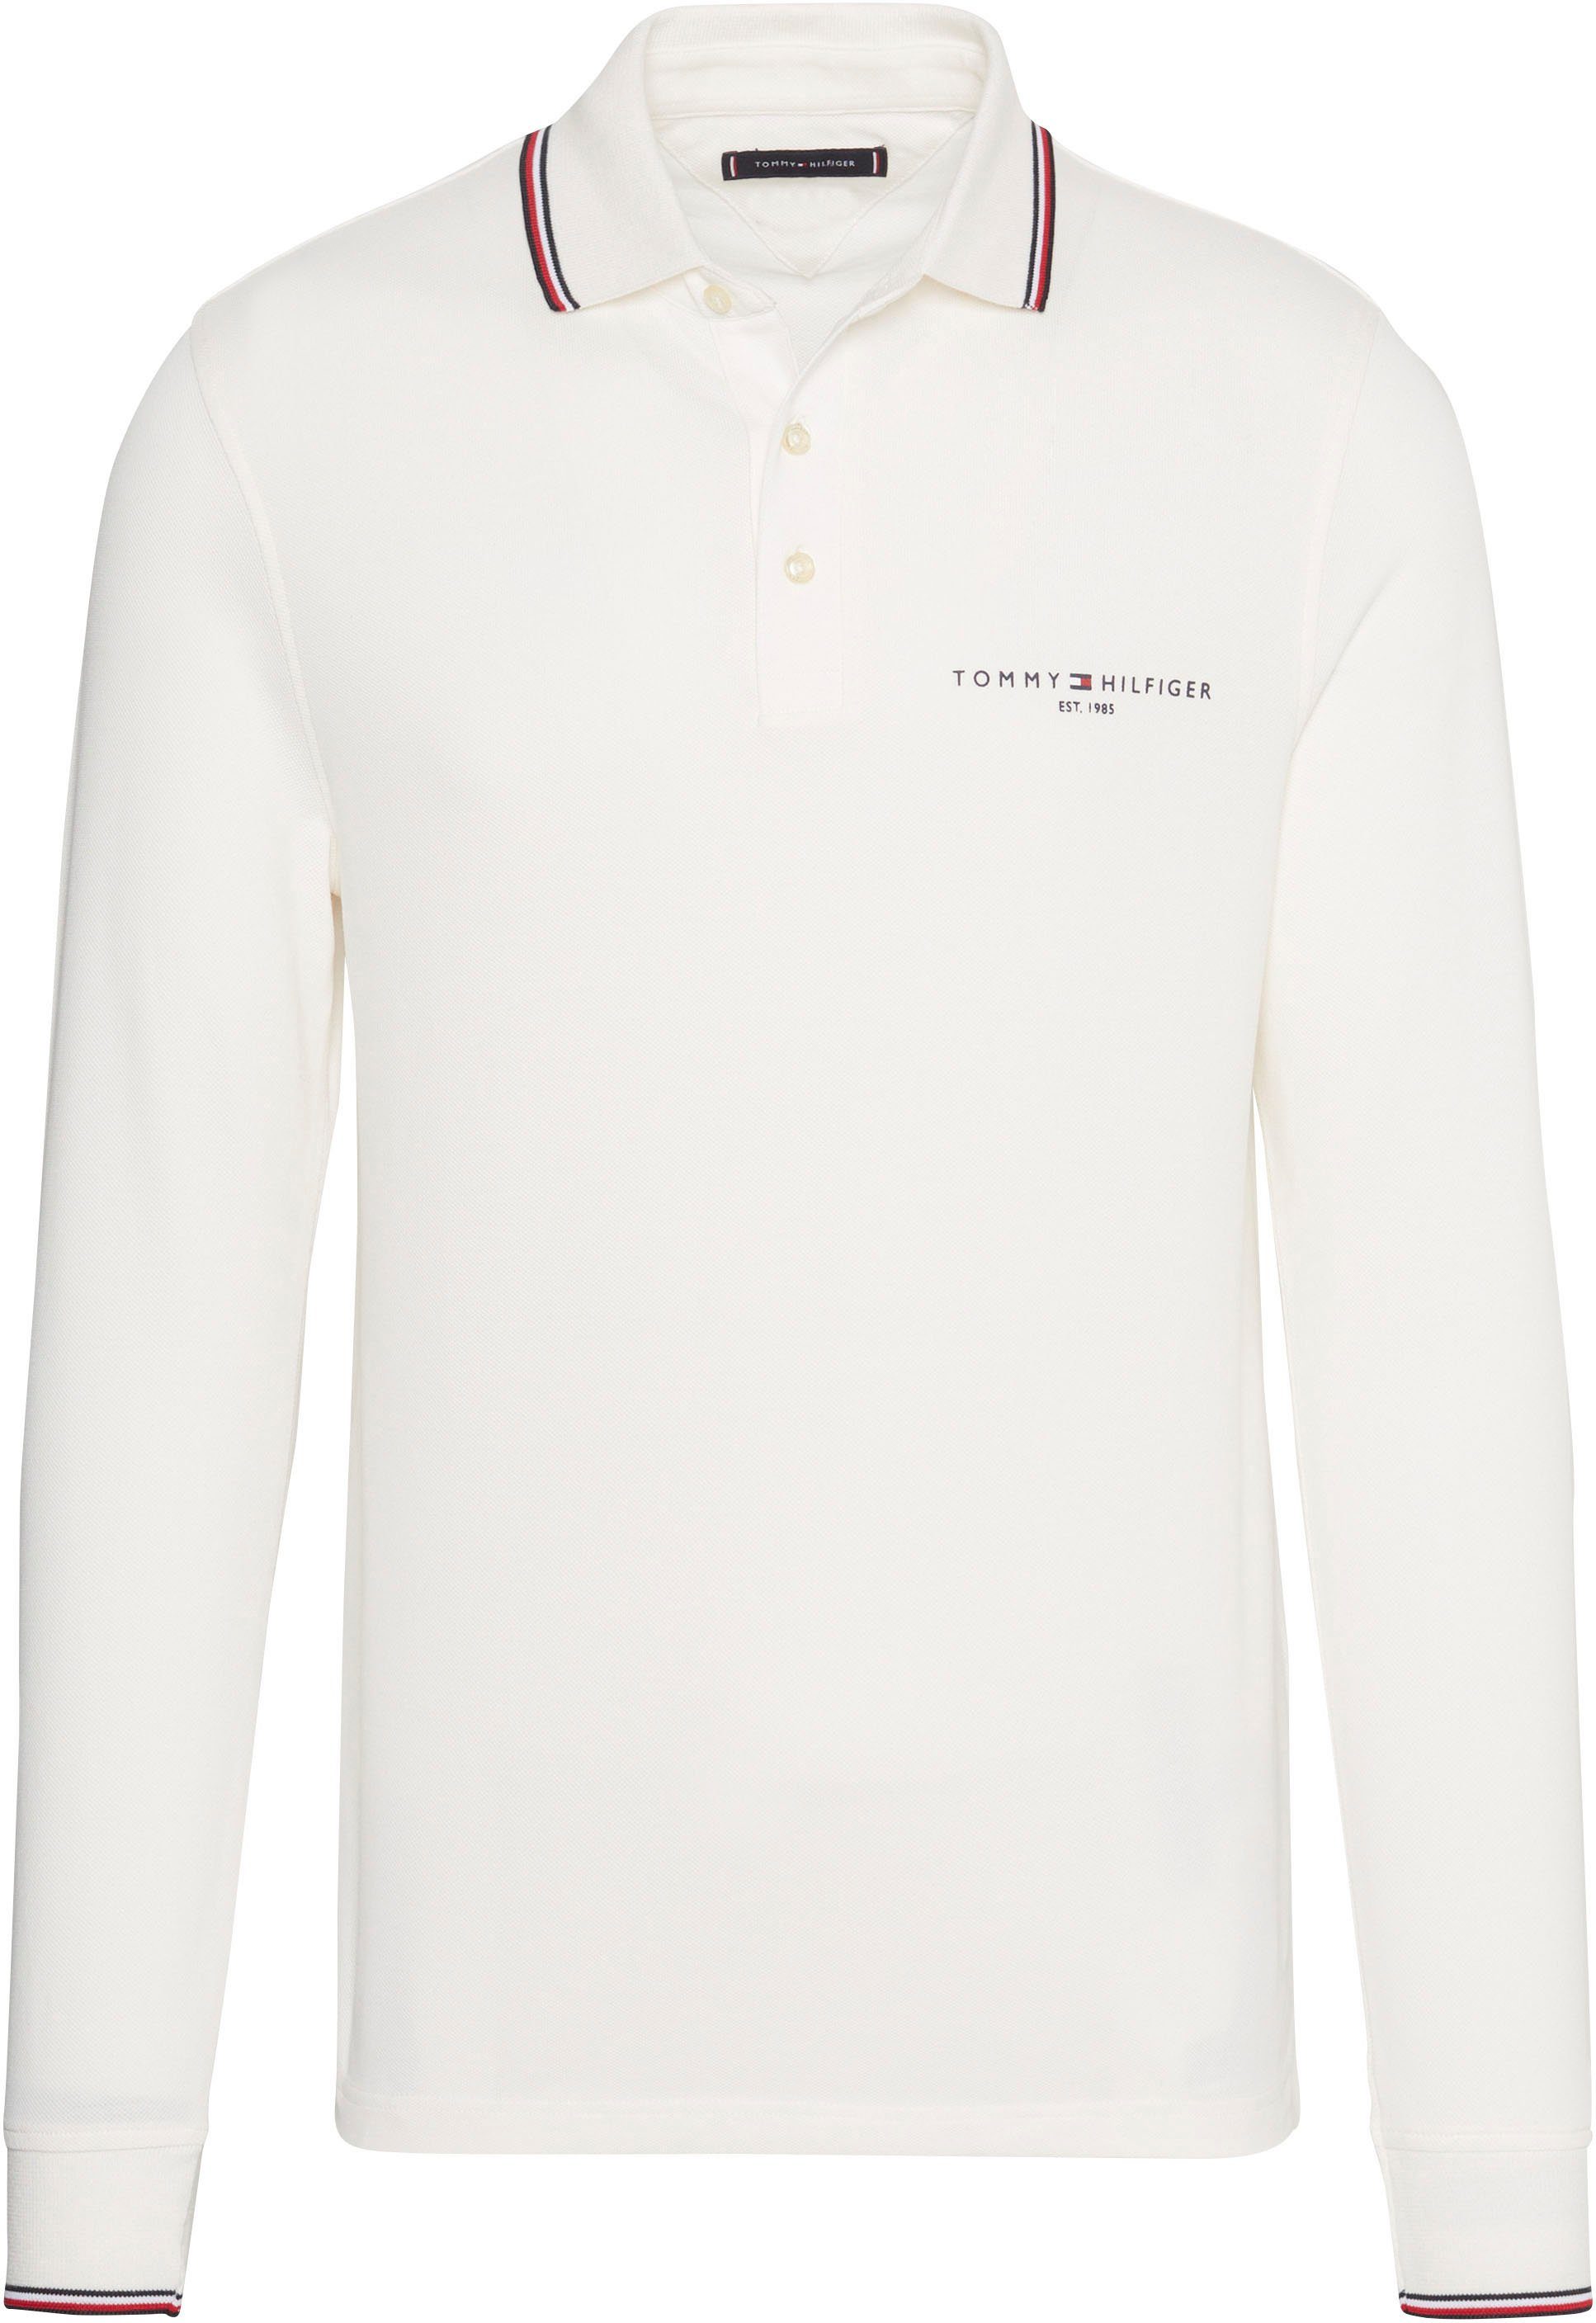 Tommy SLIM Hilfiger TIPPED PLACE POLO Langarm-Poloshirt L/S white